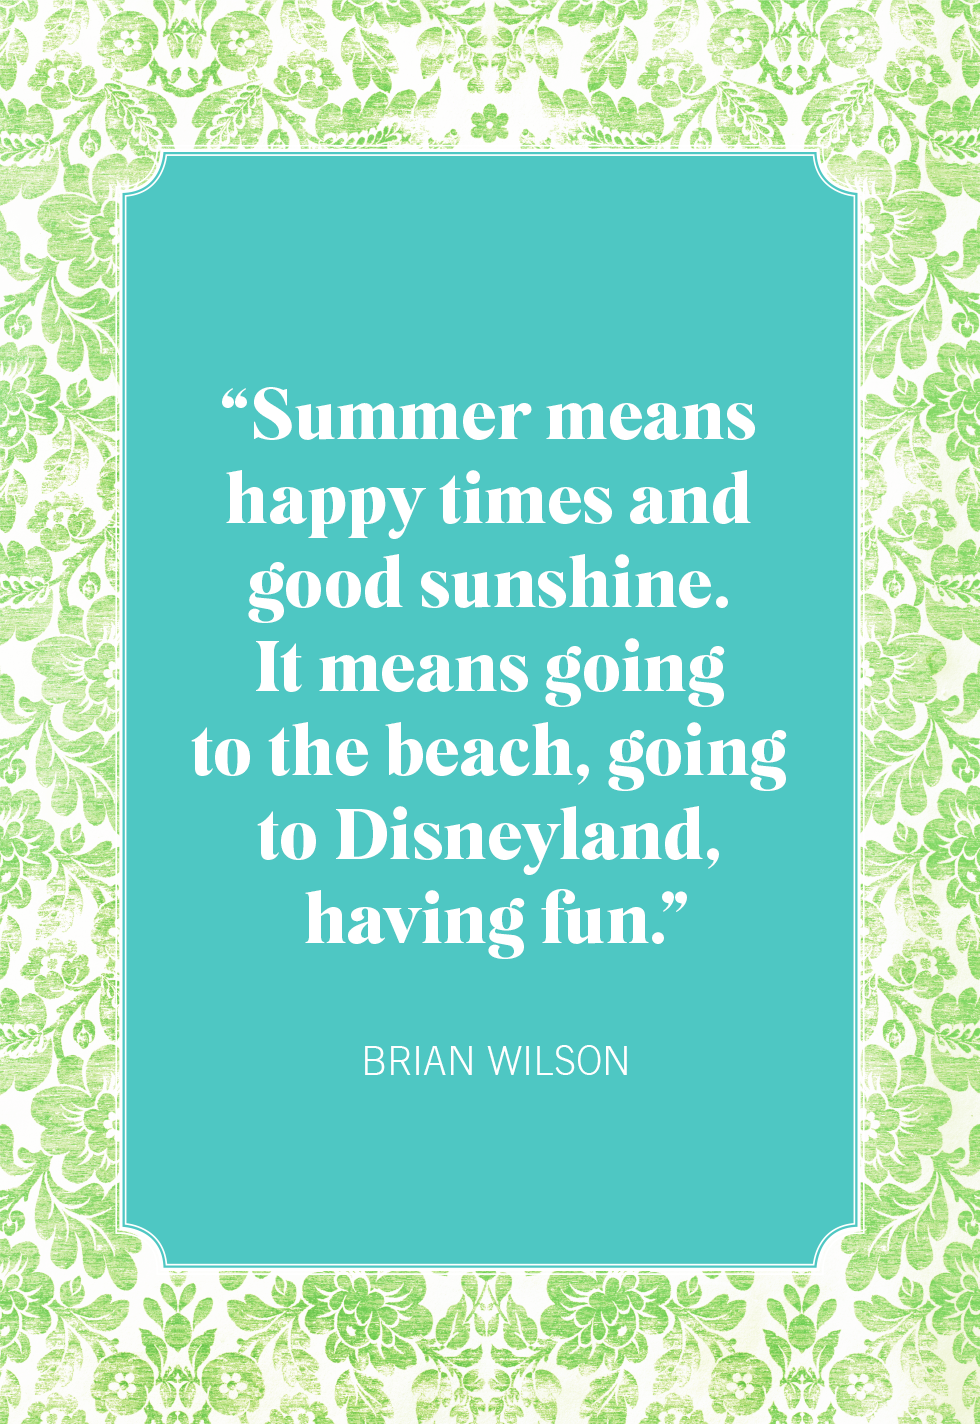 summer images with quotes